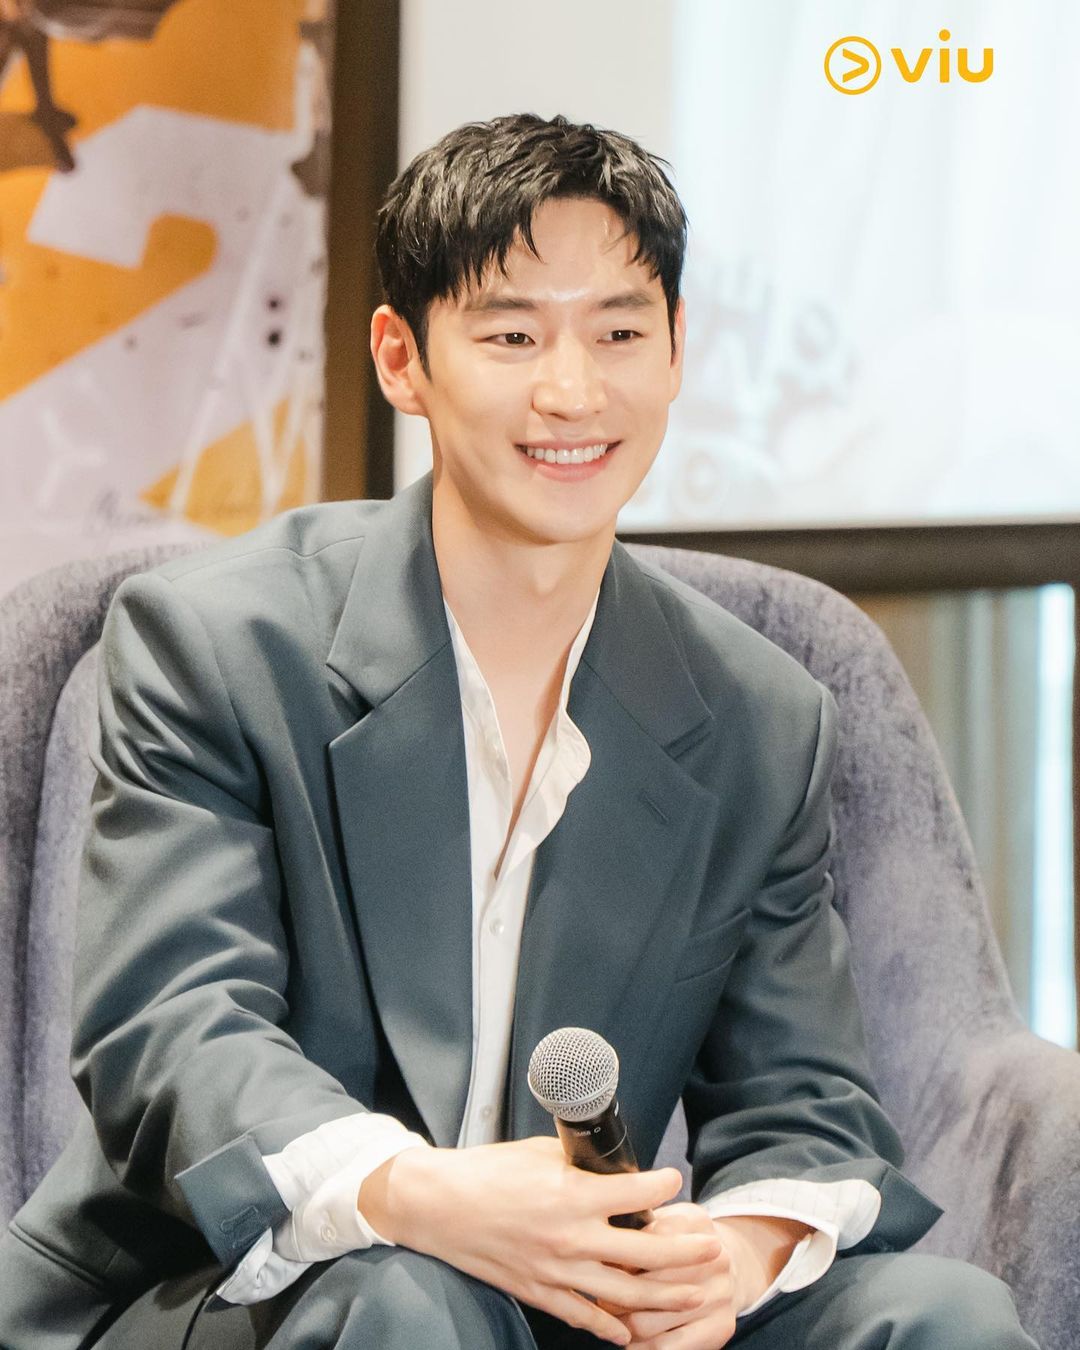 7 New Facts We Learned About Lee Je Hoon That You Need To Know